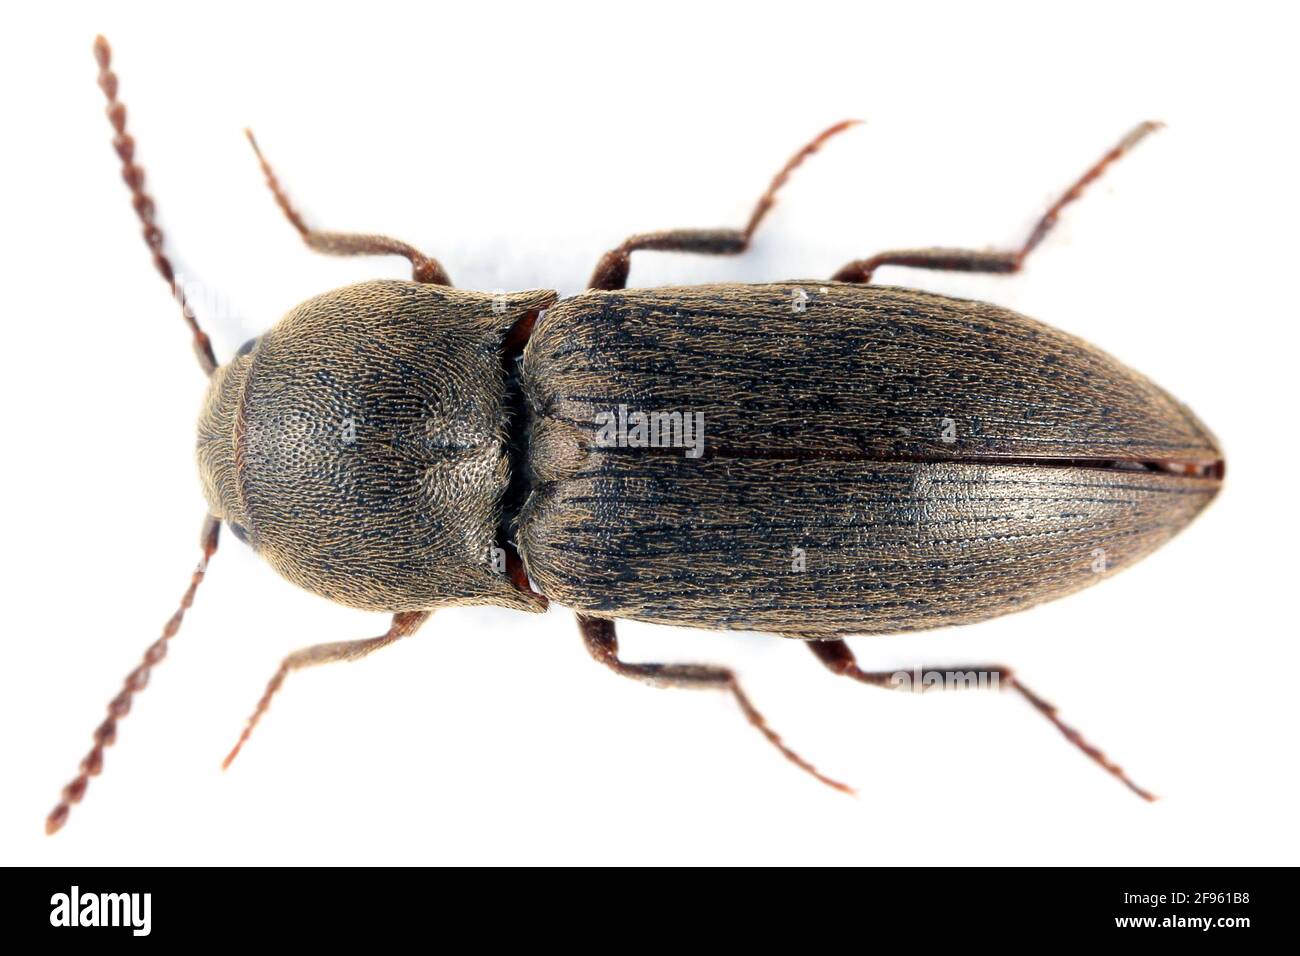 Agriotes obscurus is a species of beetle from the family of Elateridae. It larvae are important pest in soil of many crops. Insect from top. Stock Photo